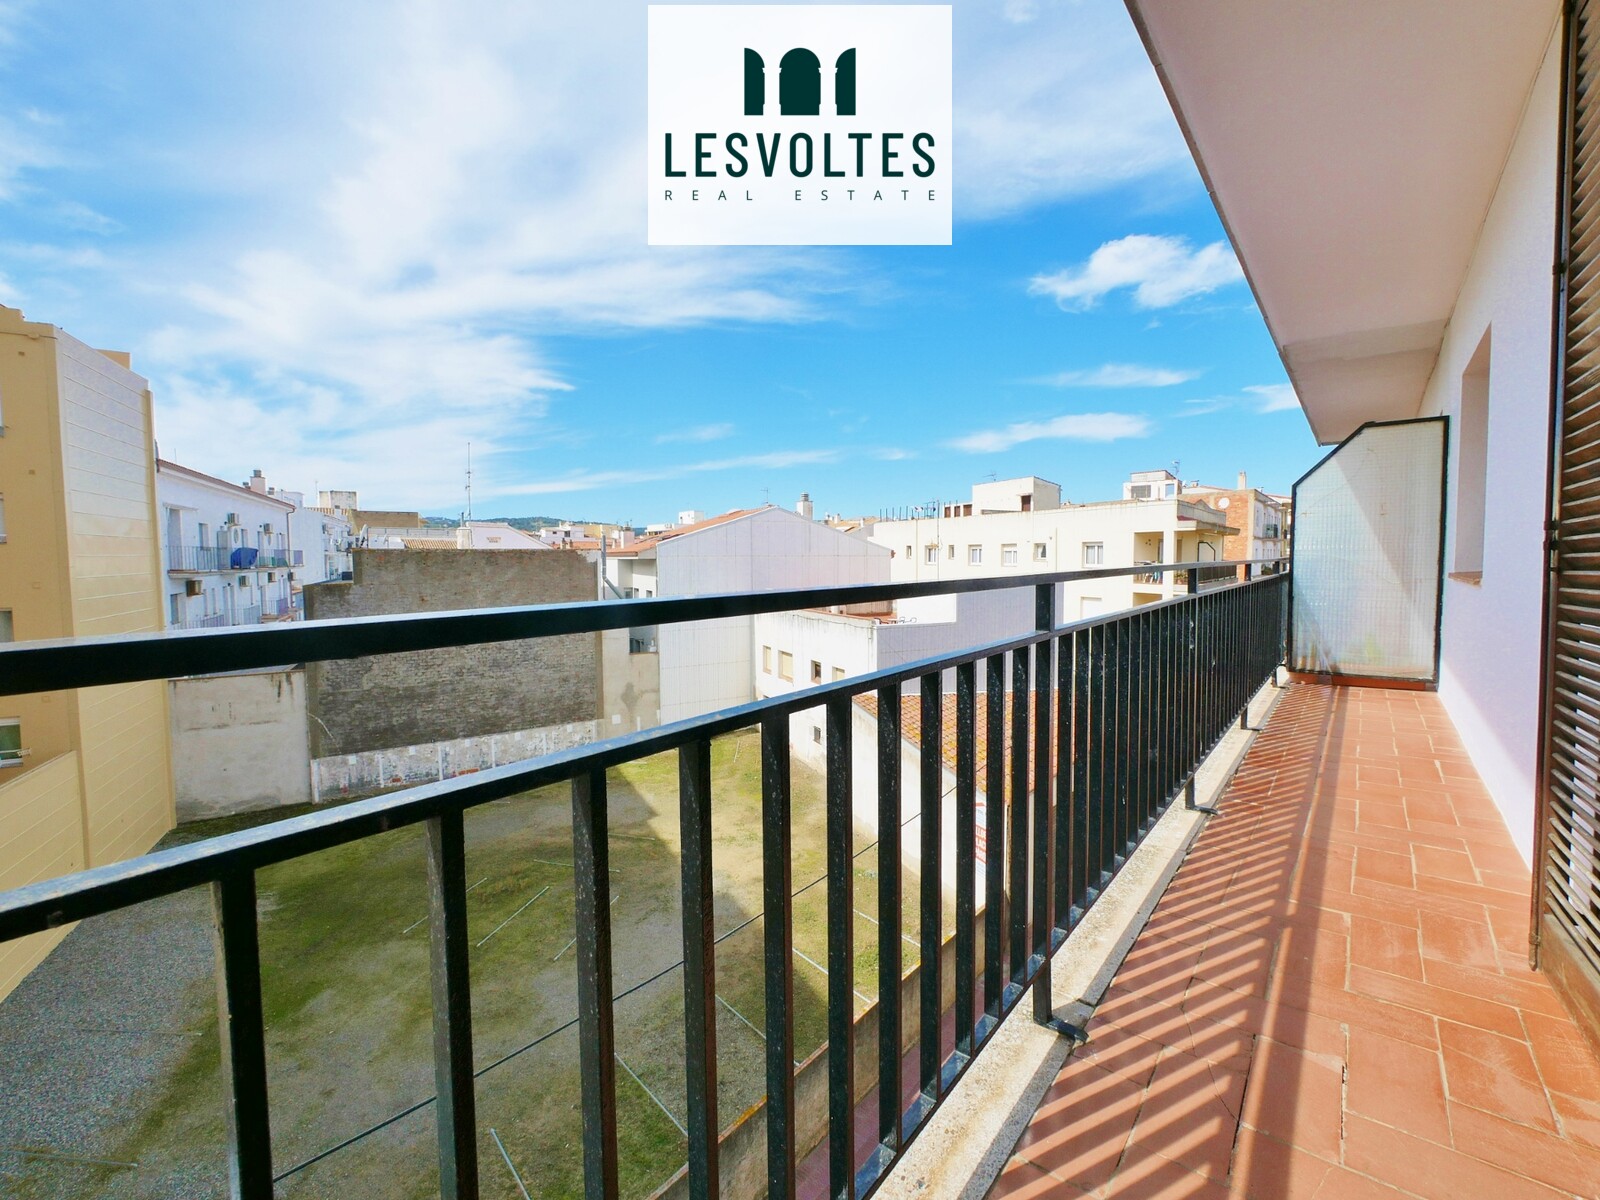 3 BEDROOM APARTMENT FOR SALE IN SANT ANTONI DE CALONGE LOCATED ON ONE STEP FROM THE BEACH